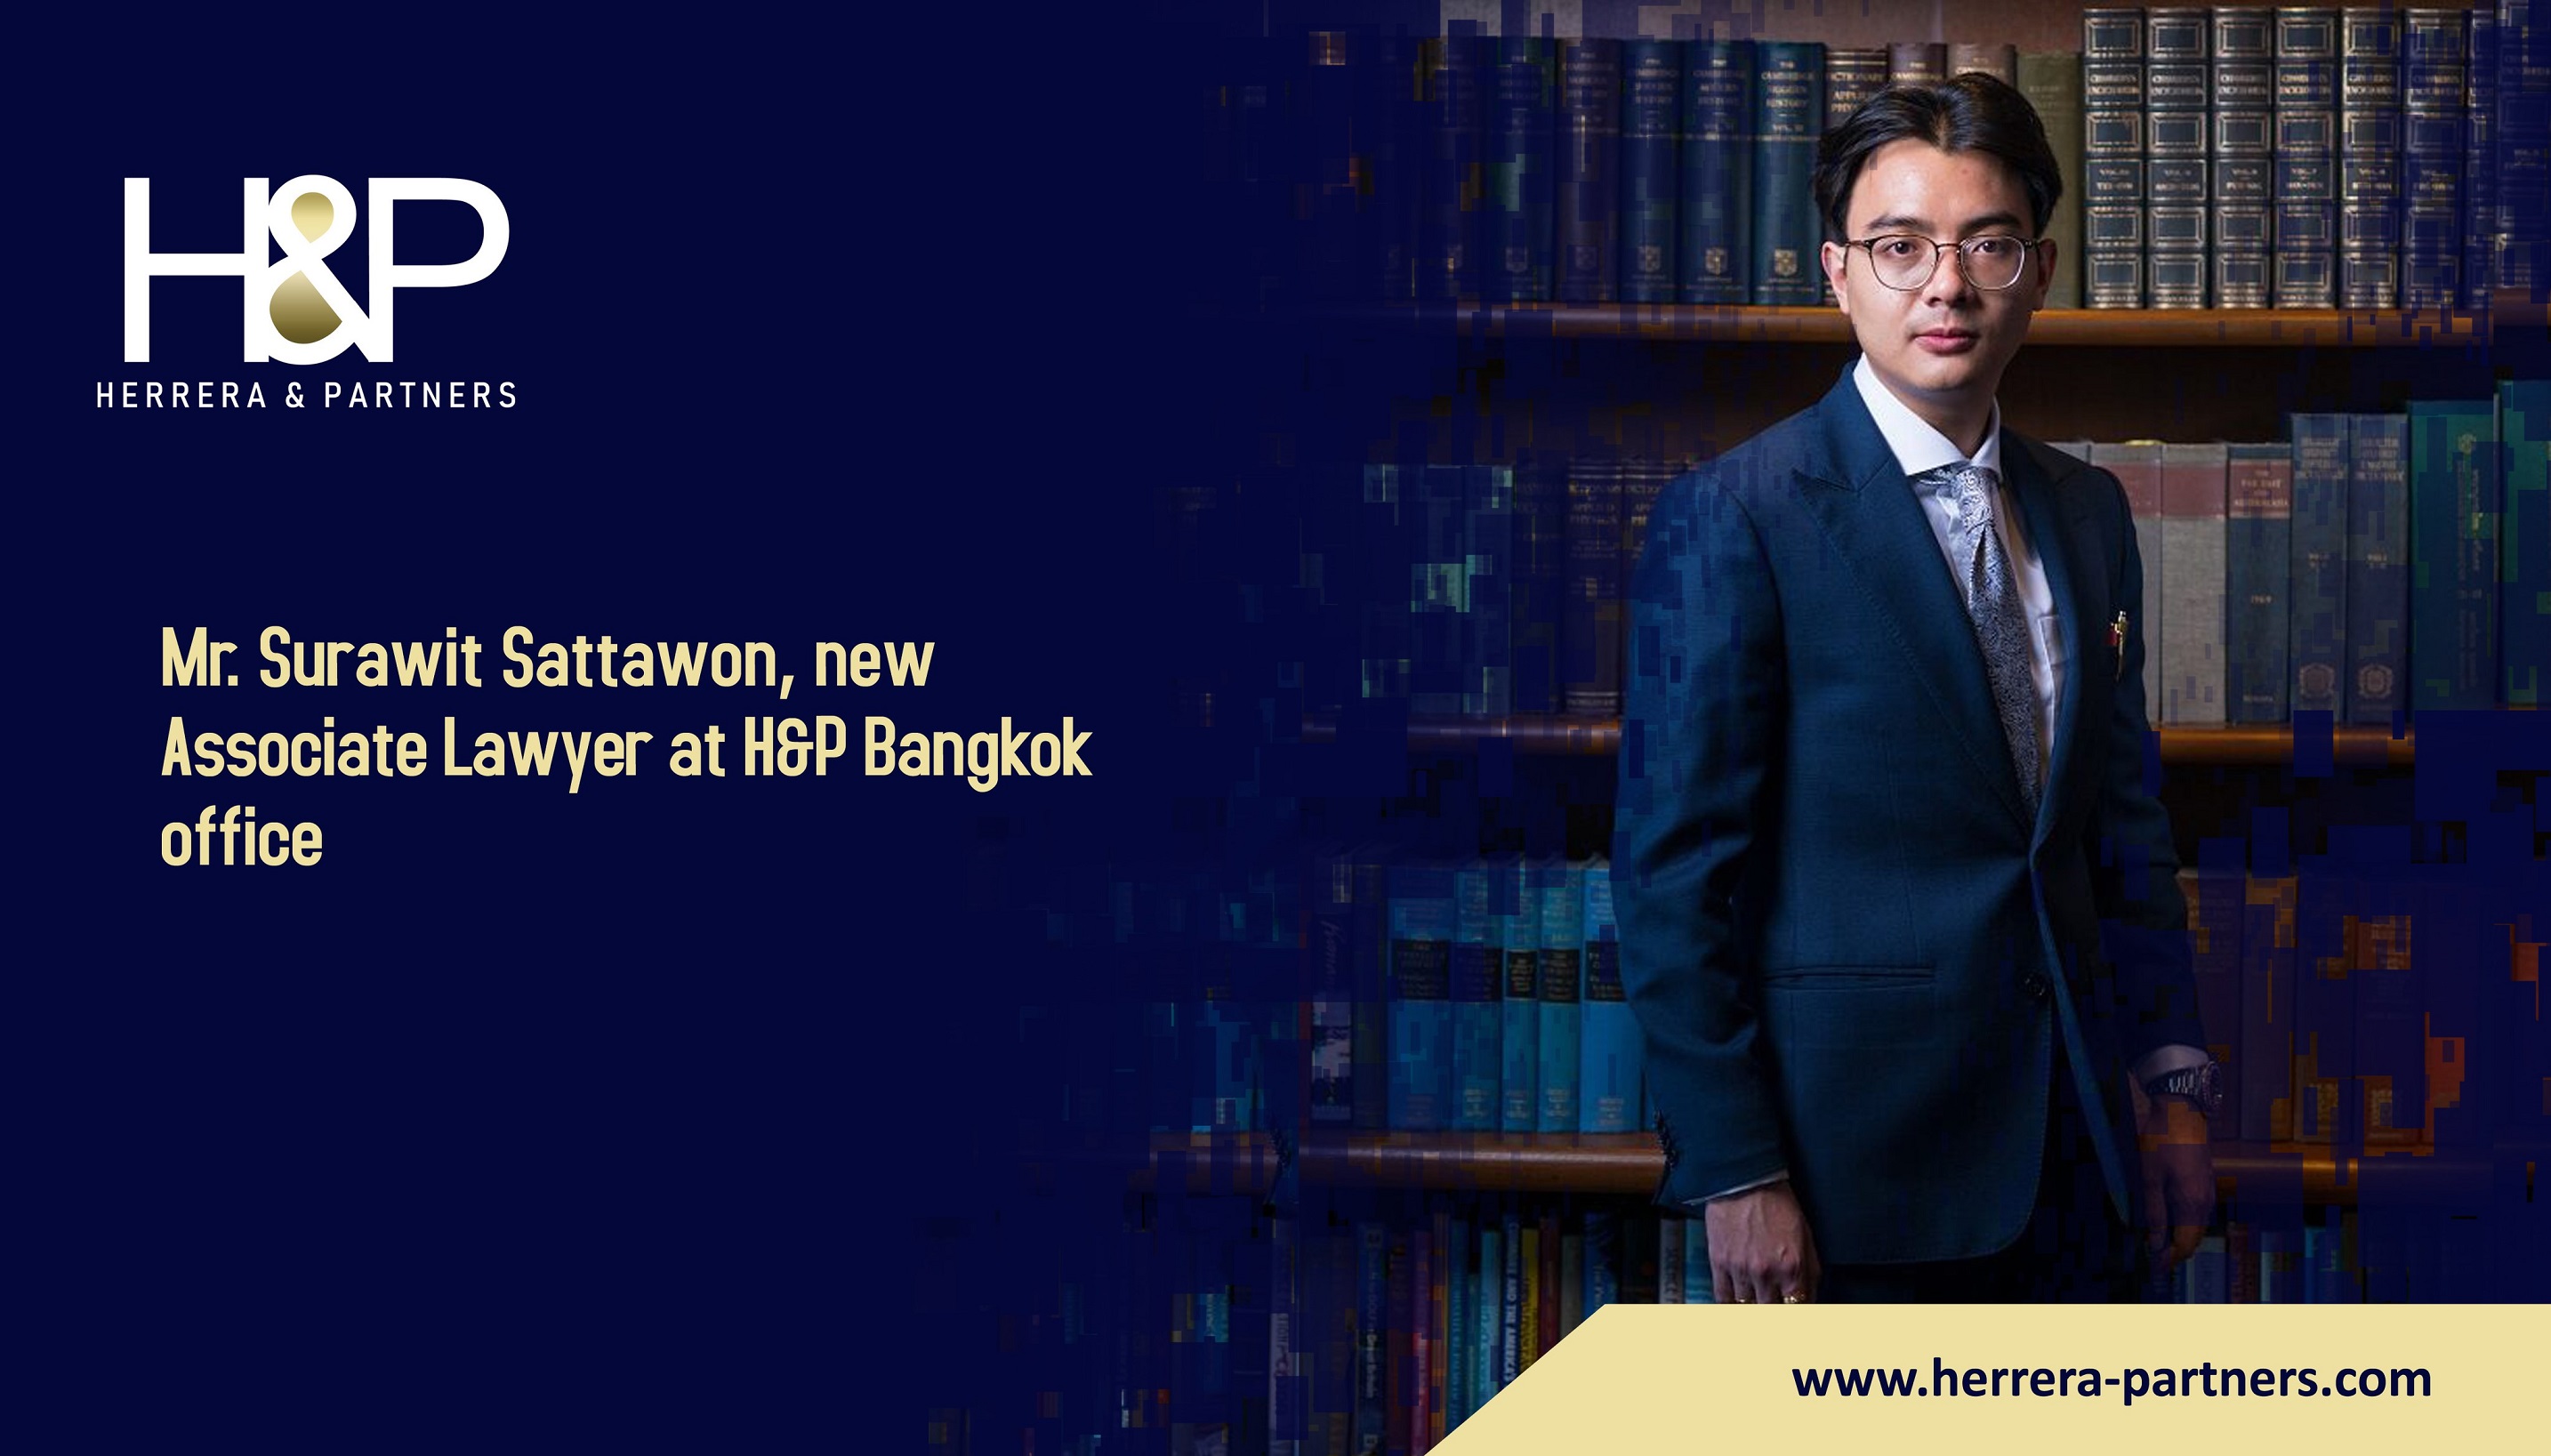 Mr. Surawit Sattawon, new Associate Lawyer at H&P Bangkok office H&P Commercial lawyer in Bangkok